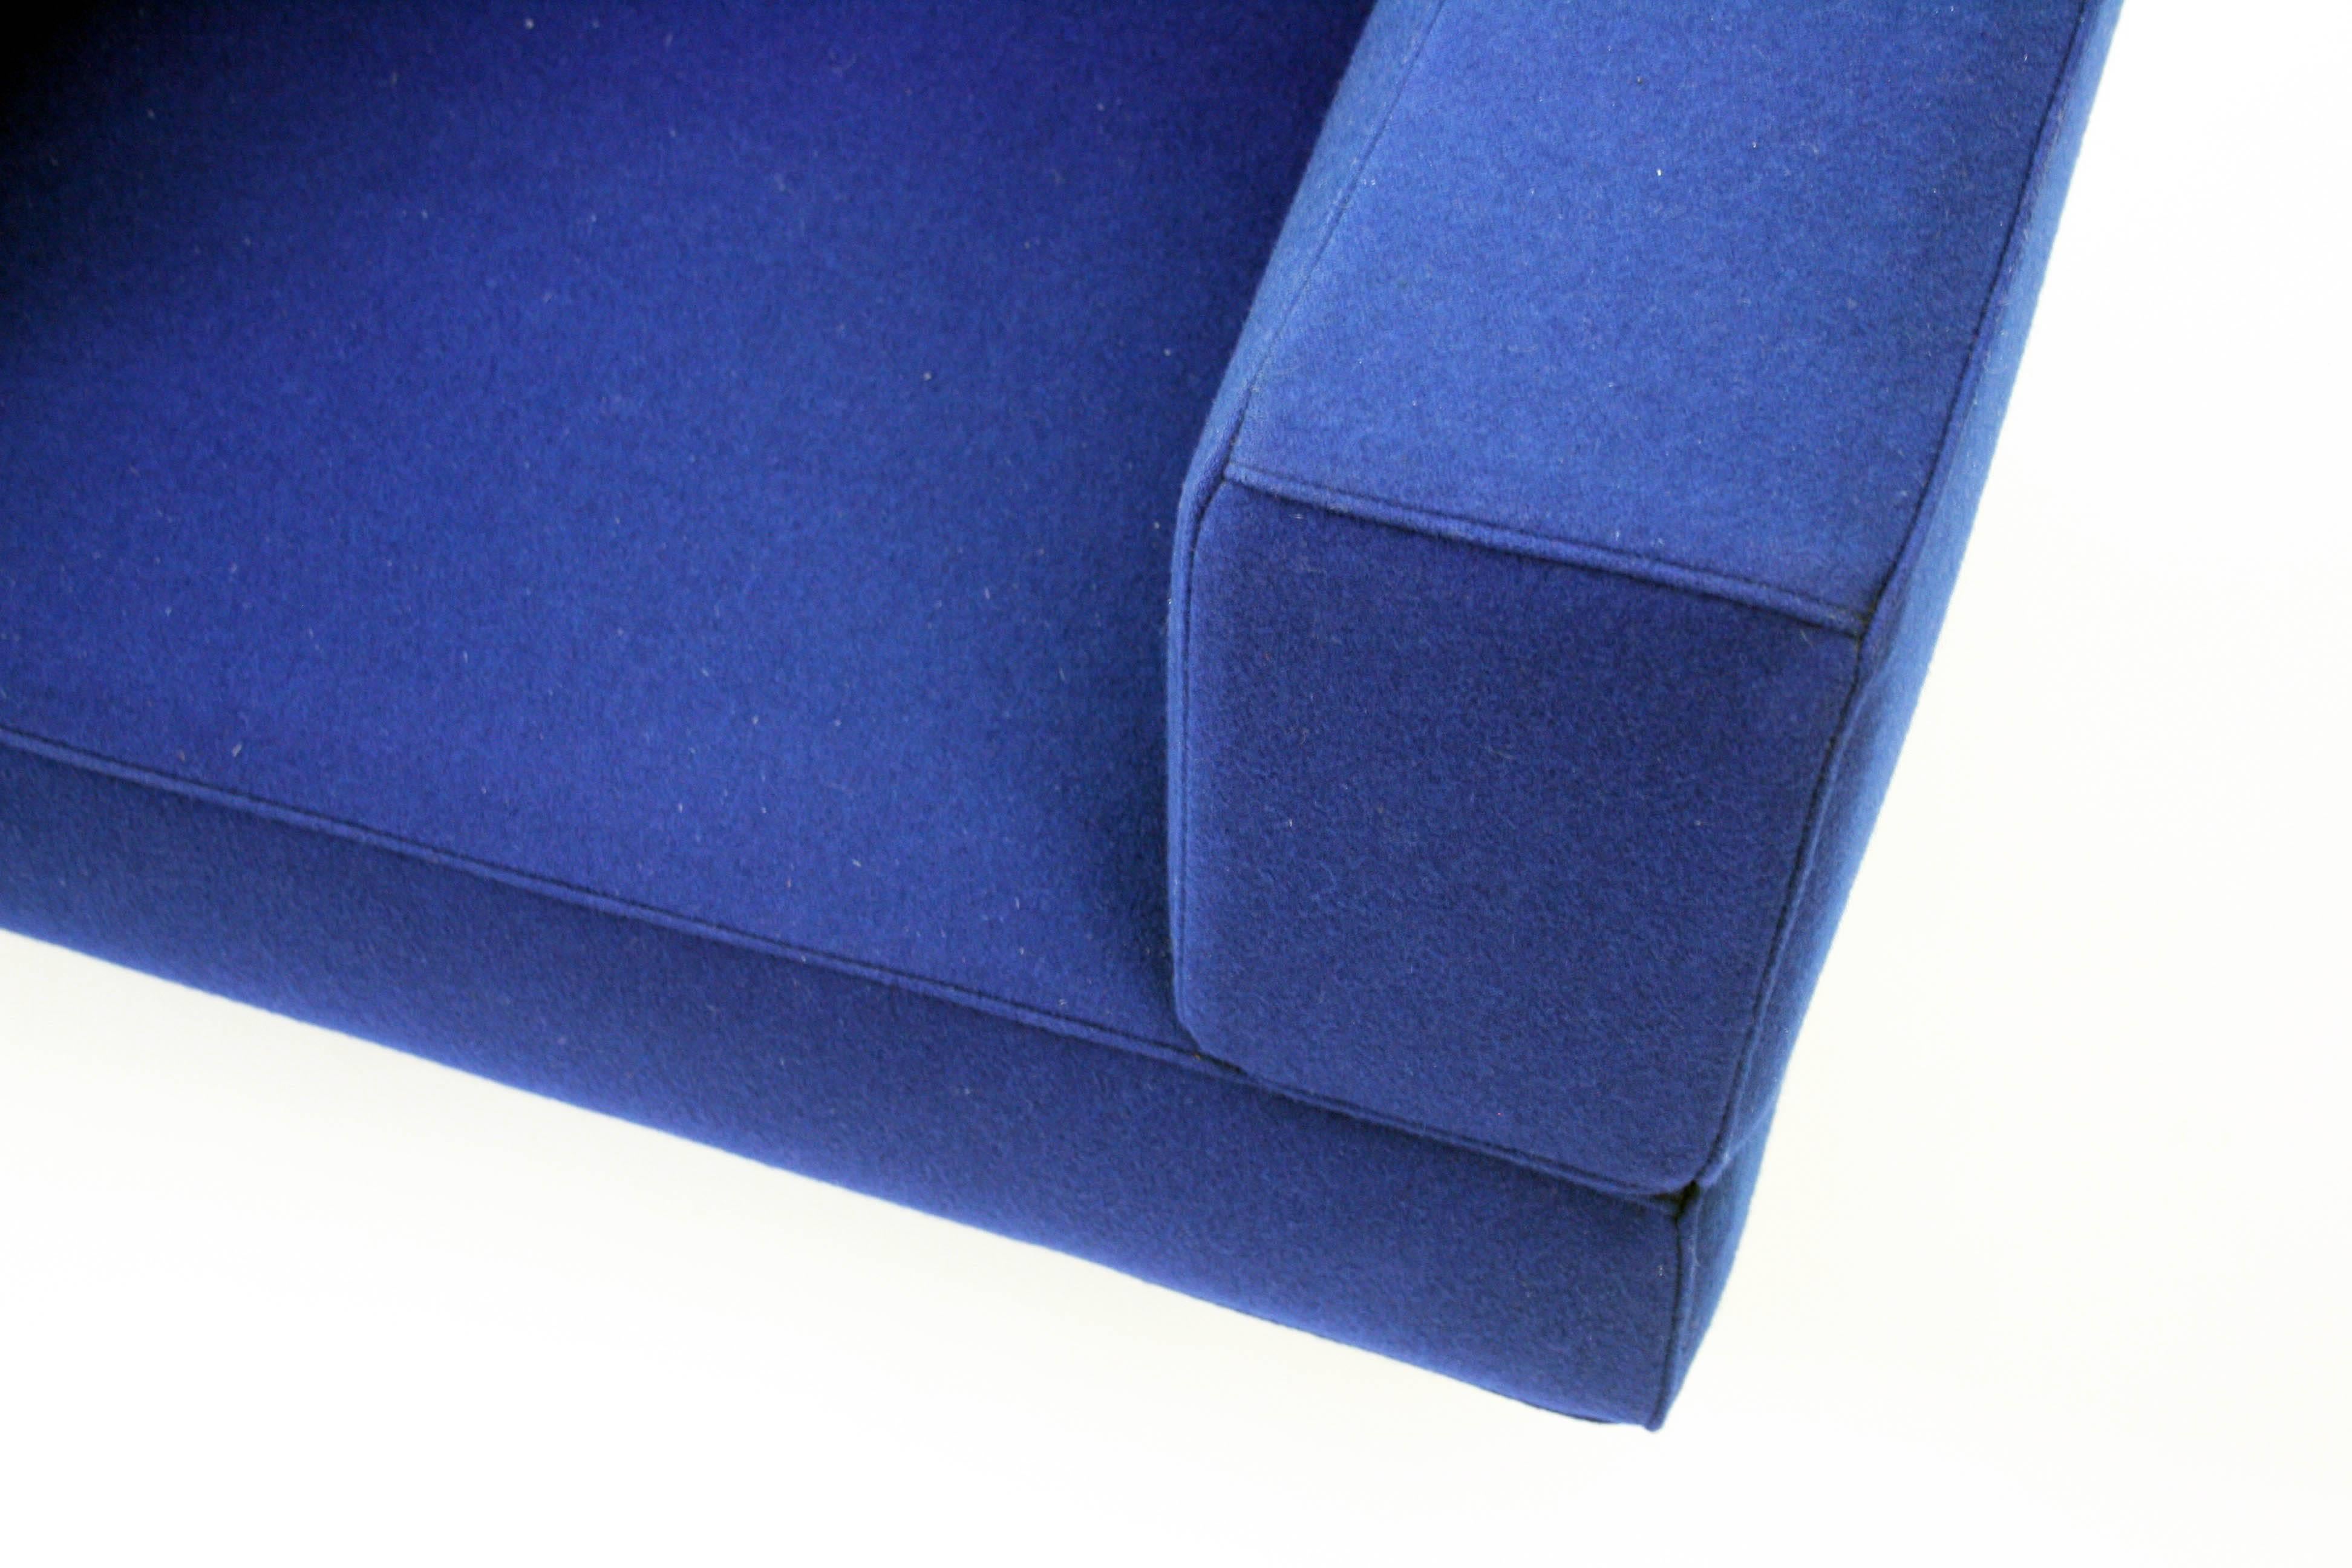 Piero Lissoni reef swivel lounge chair in blue felt for Cassina. Excellent condition.